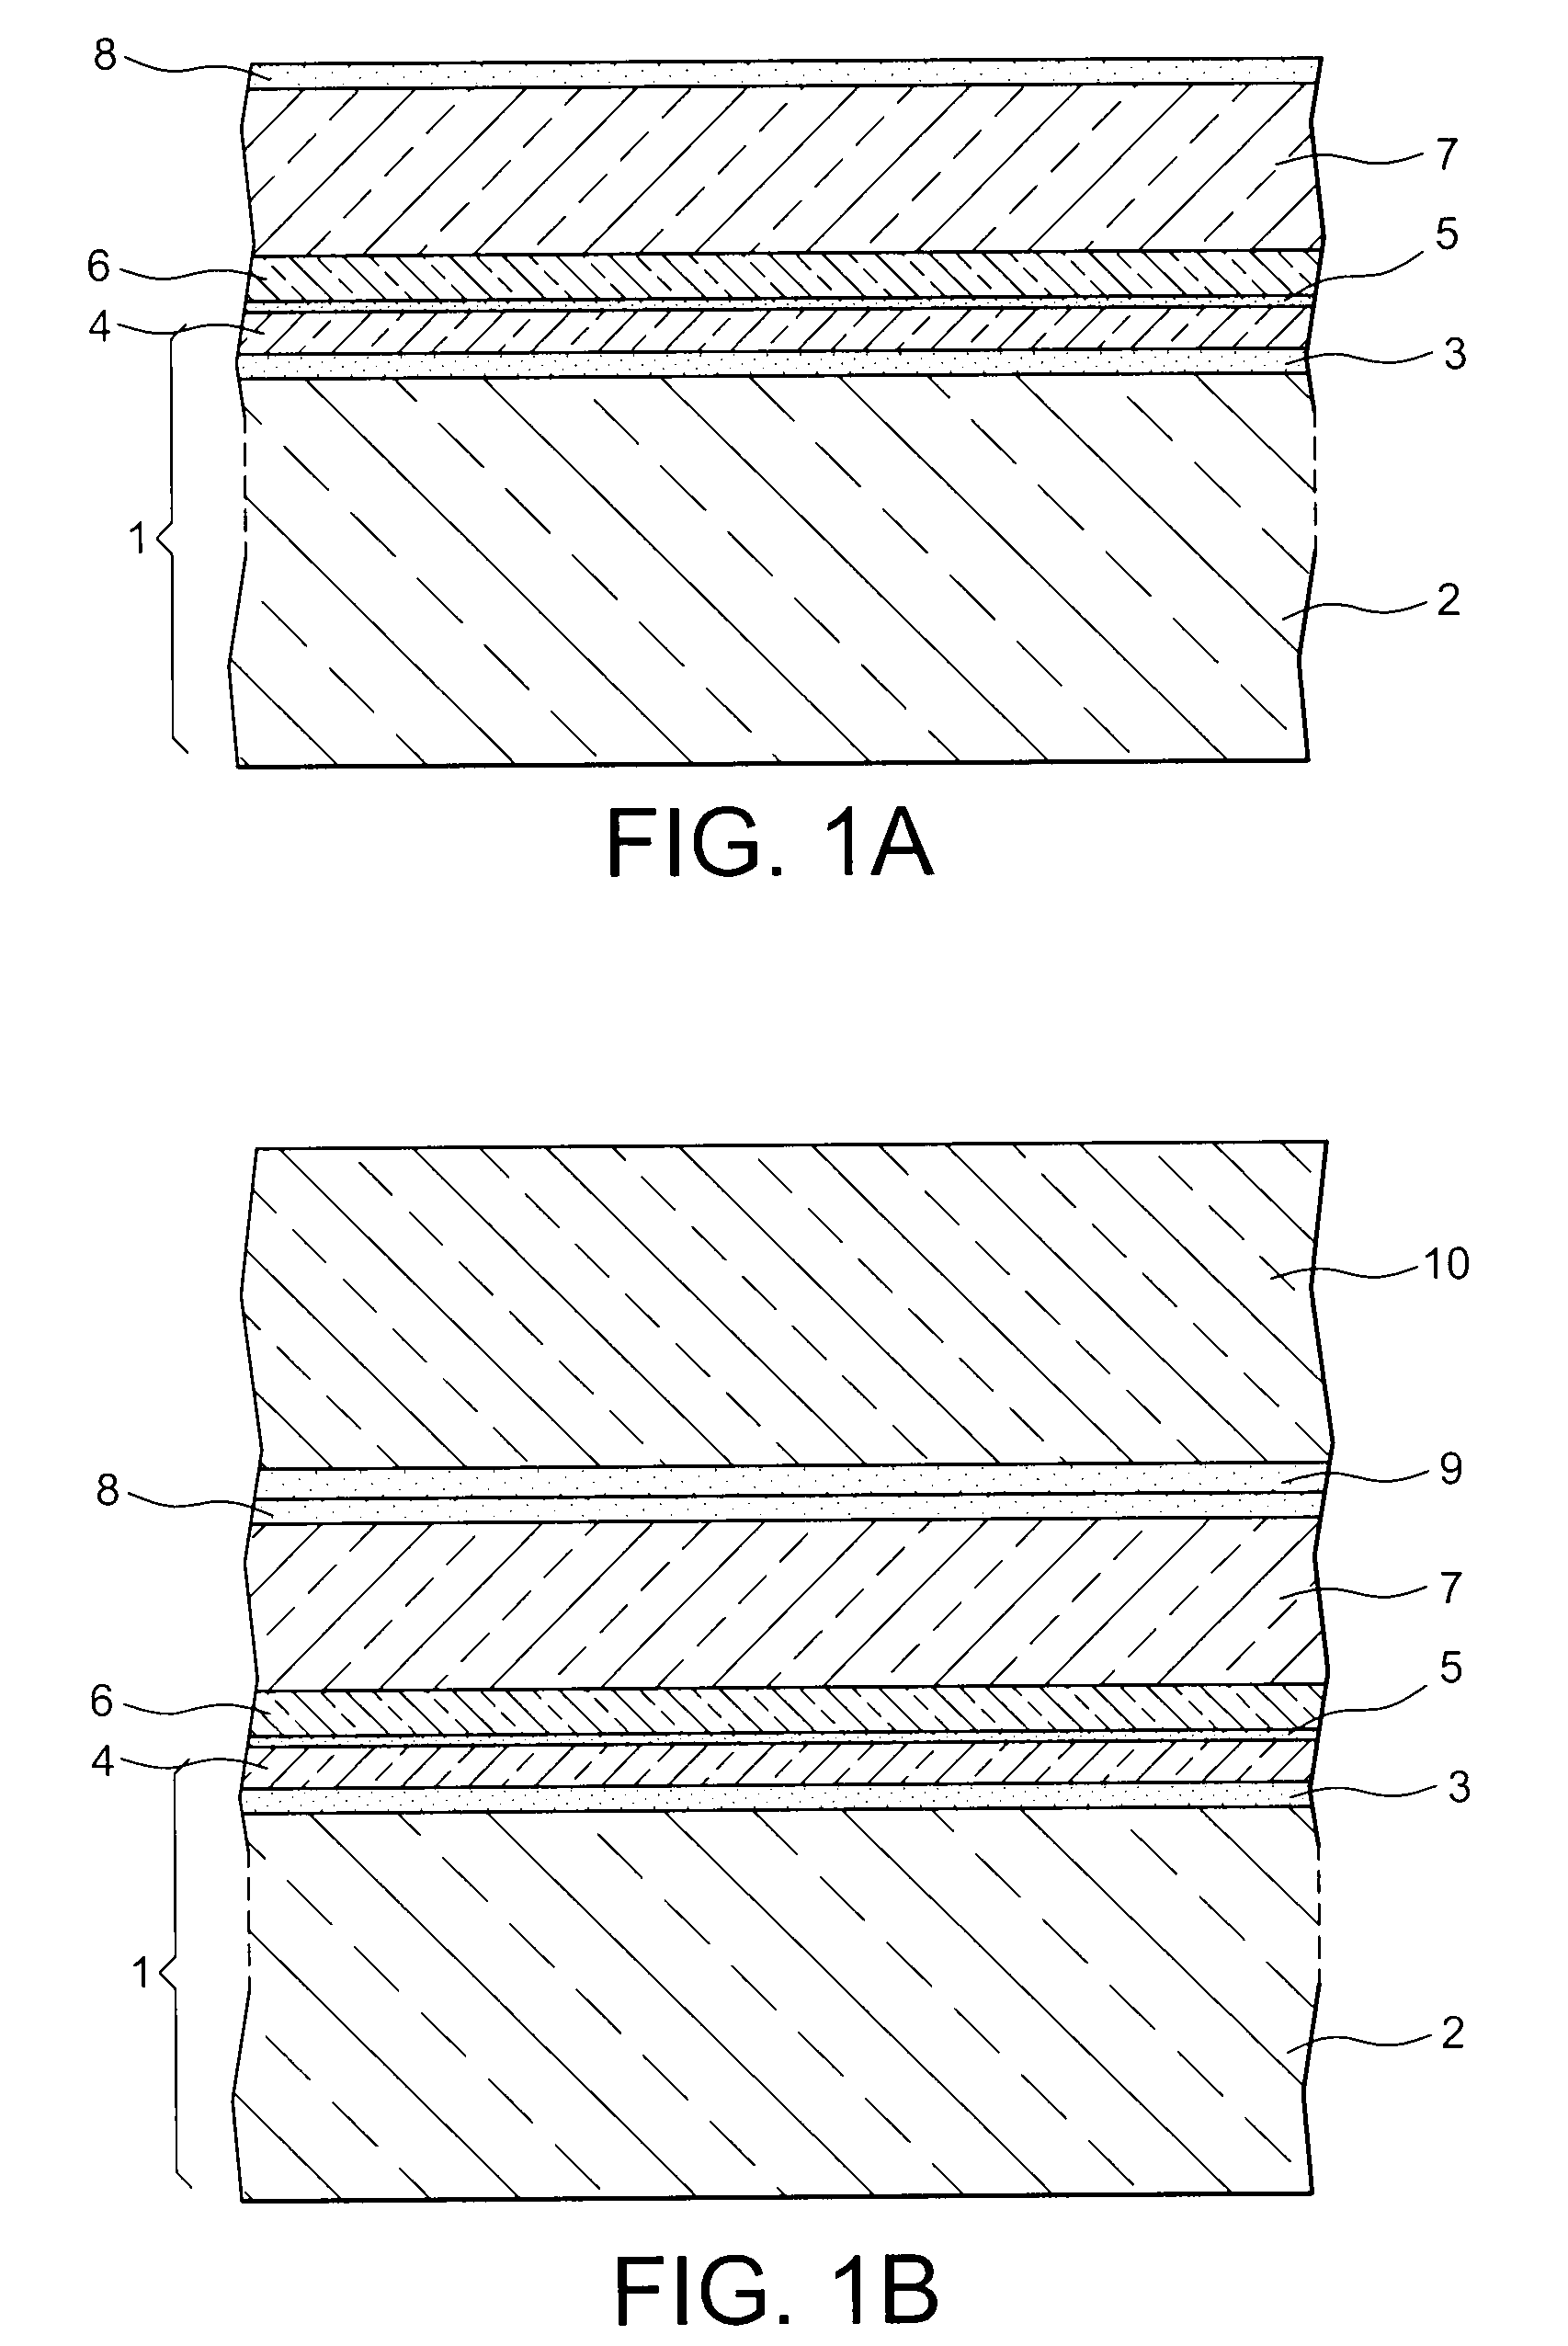 Method for manufacturing a field effect transistor with auto-aligned grids